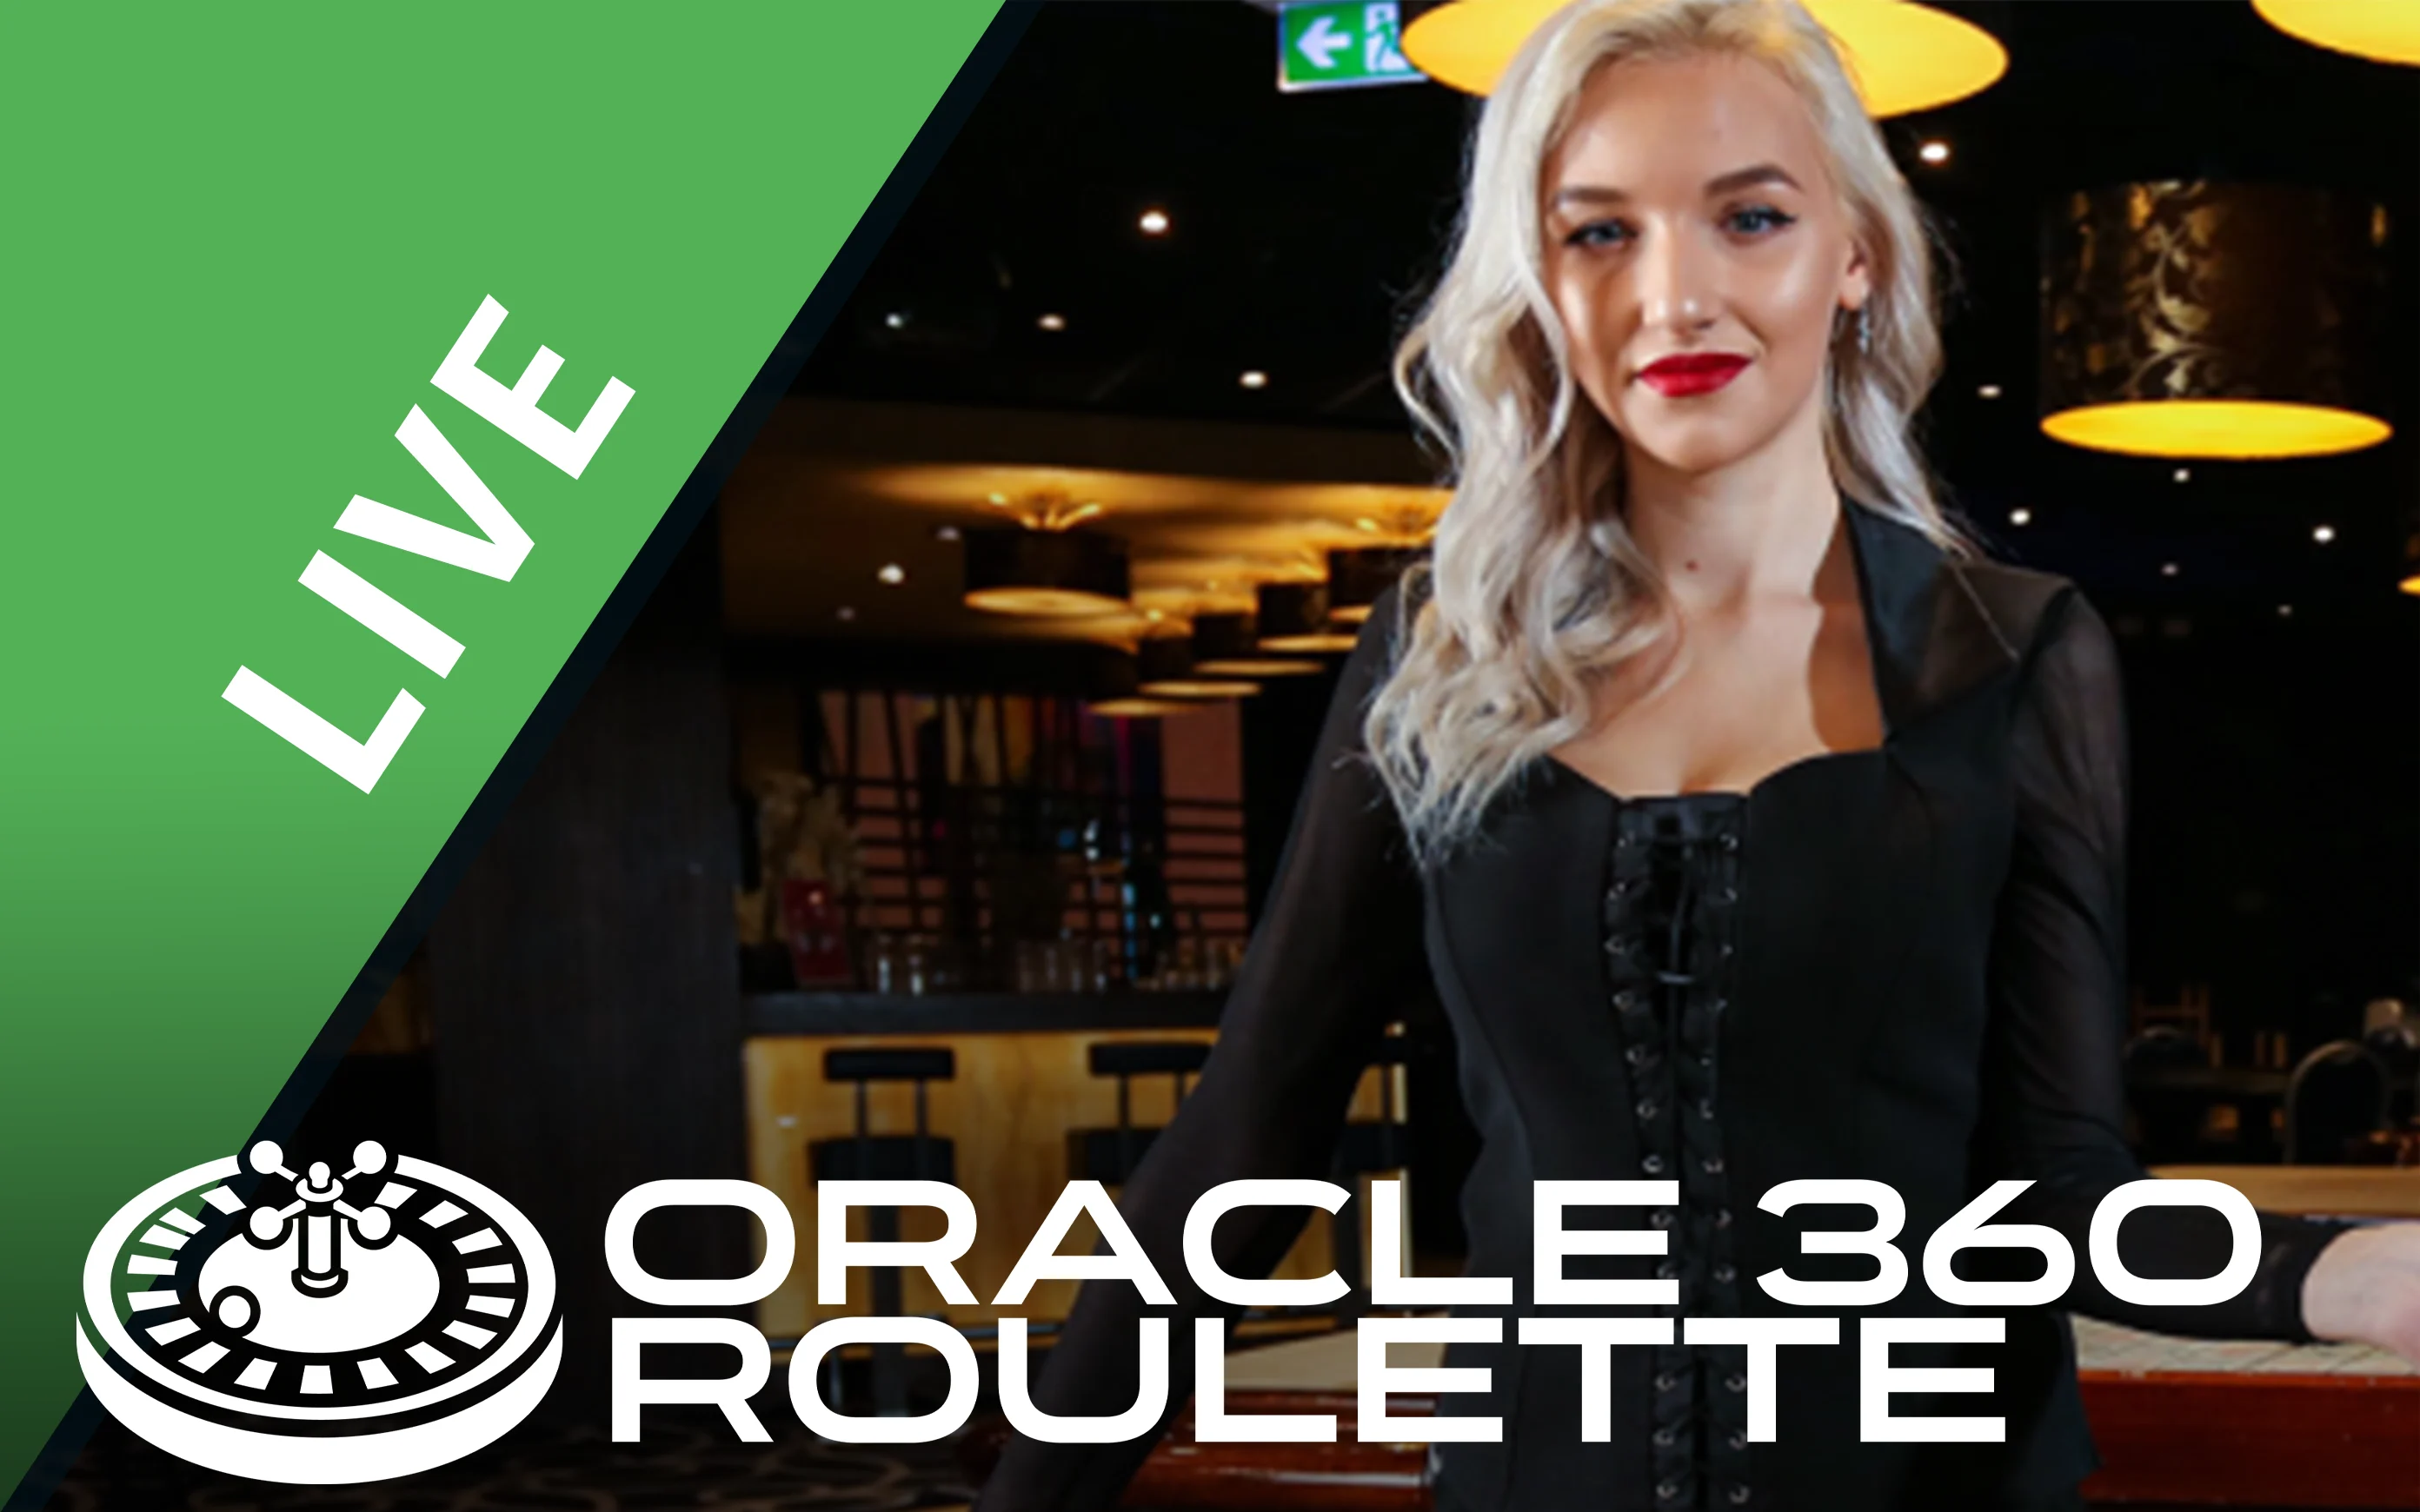 Jogue Oracle 360 Roulette no casino online Starcasino.be 